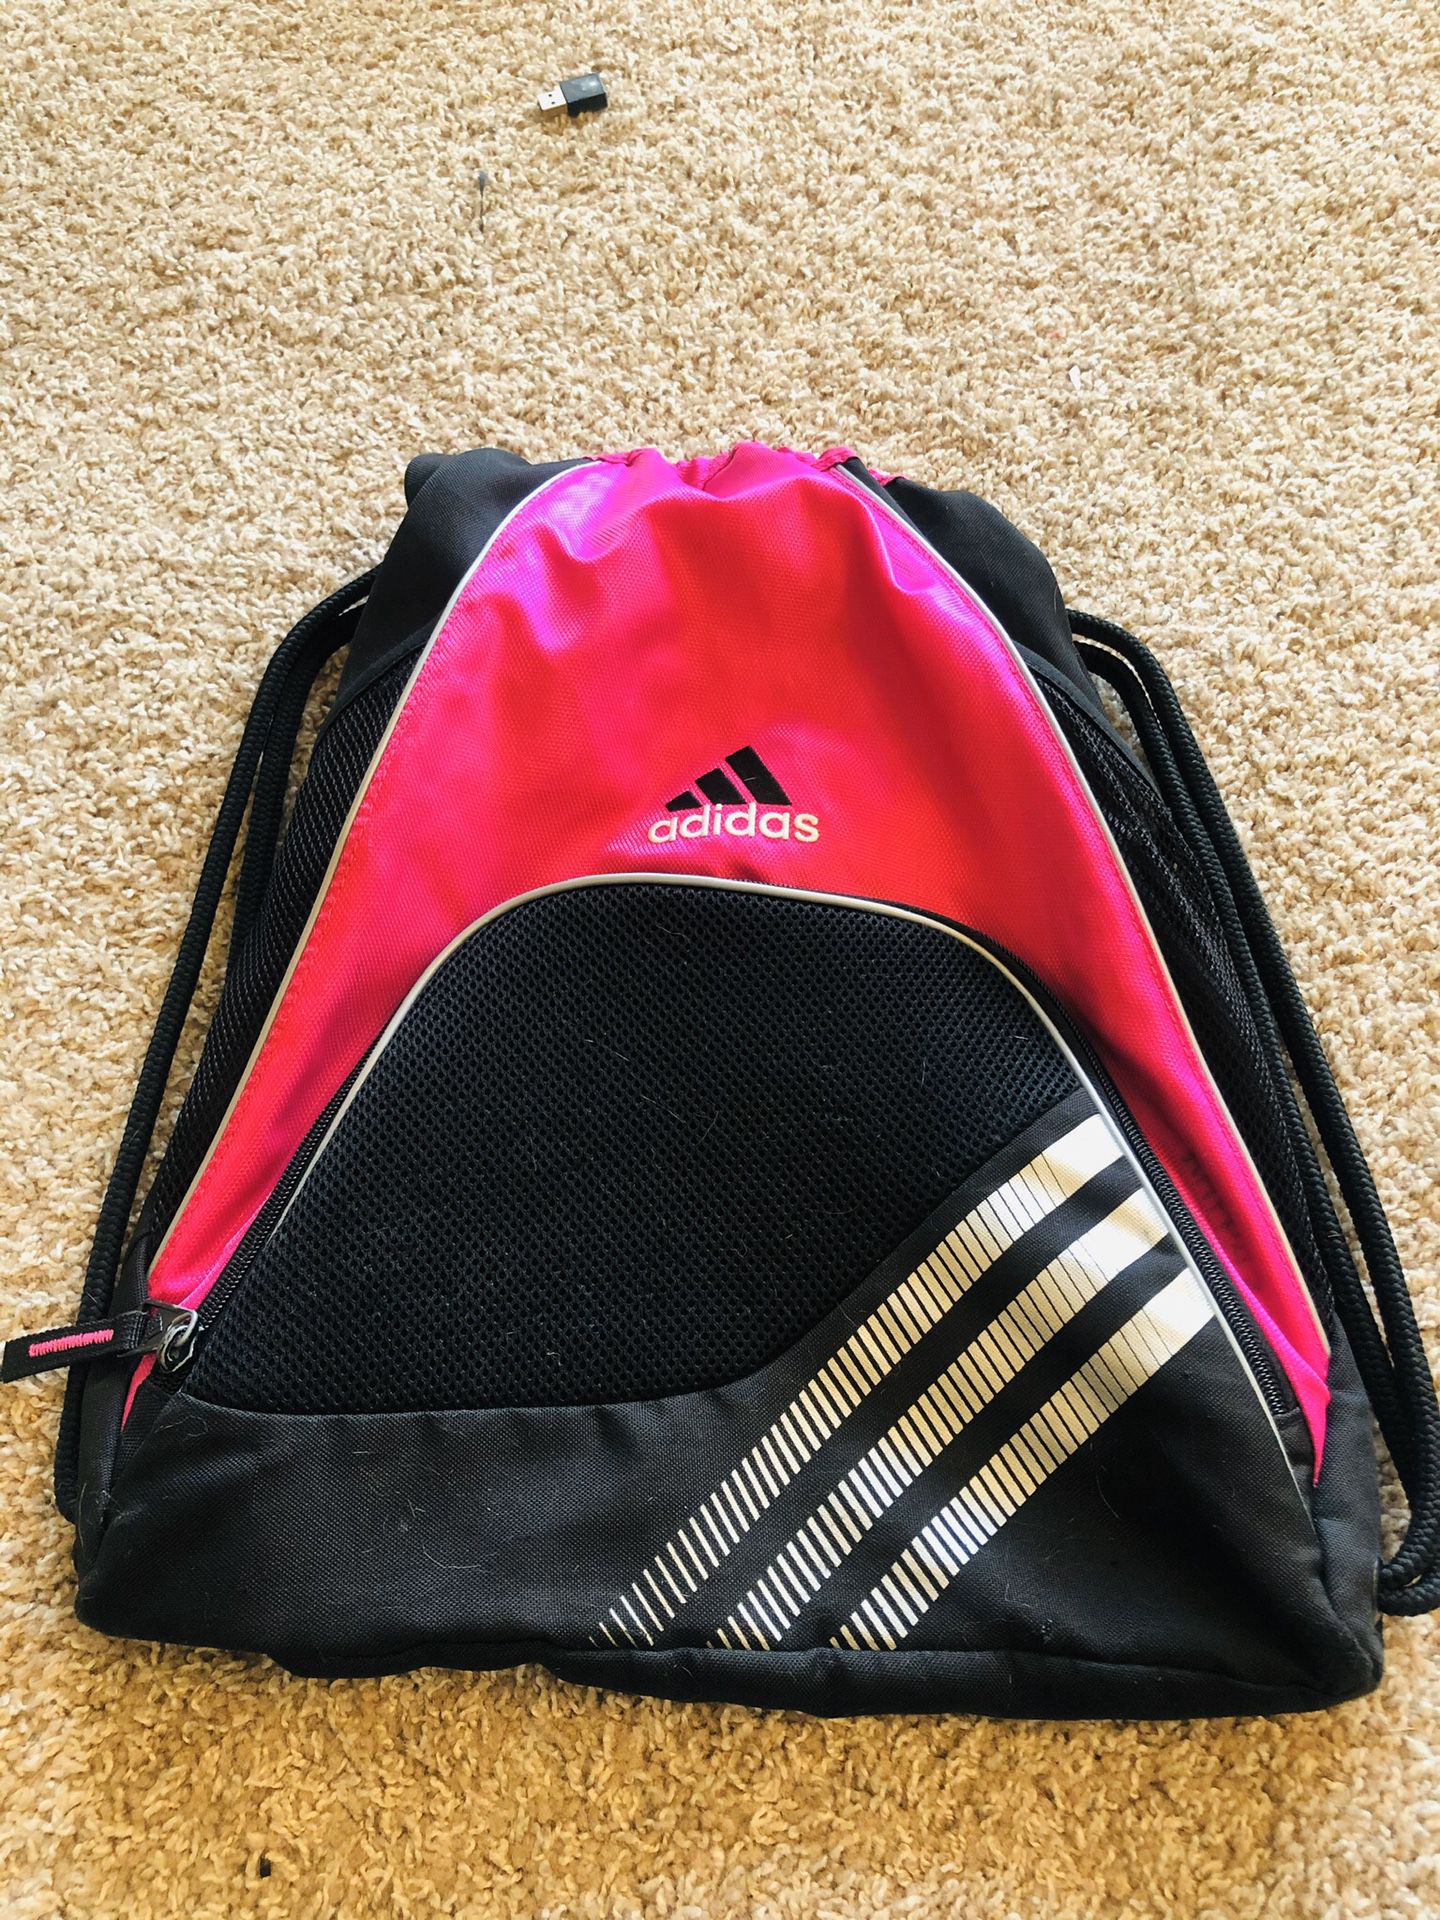 NEW Adidas Draw String Backpack - Pink